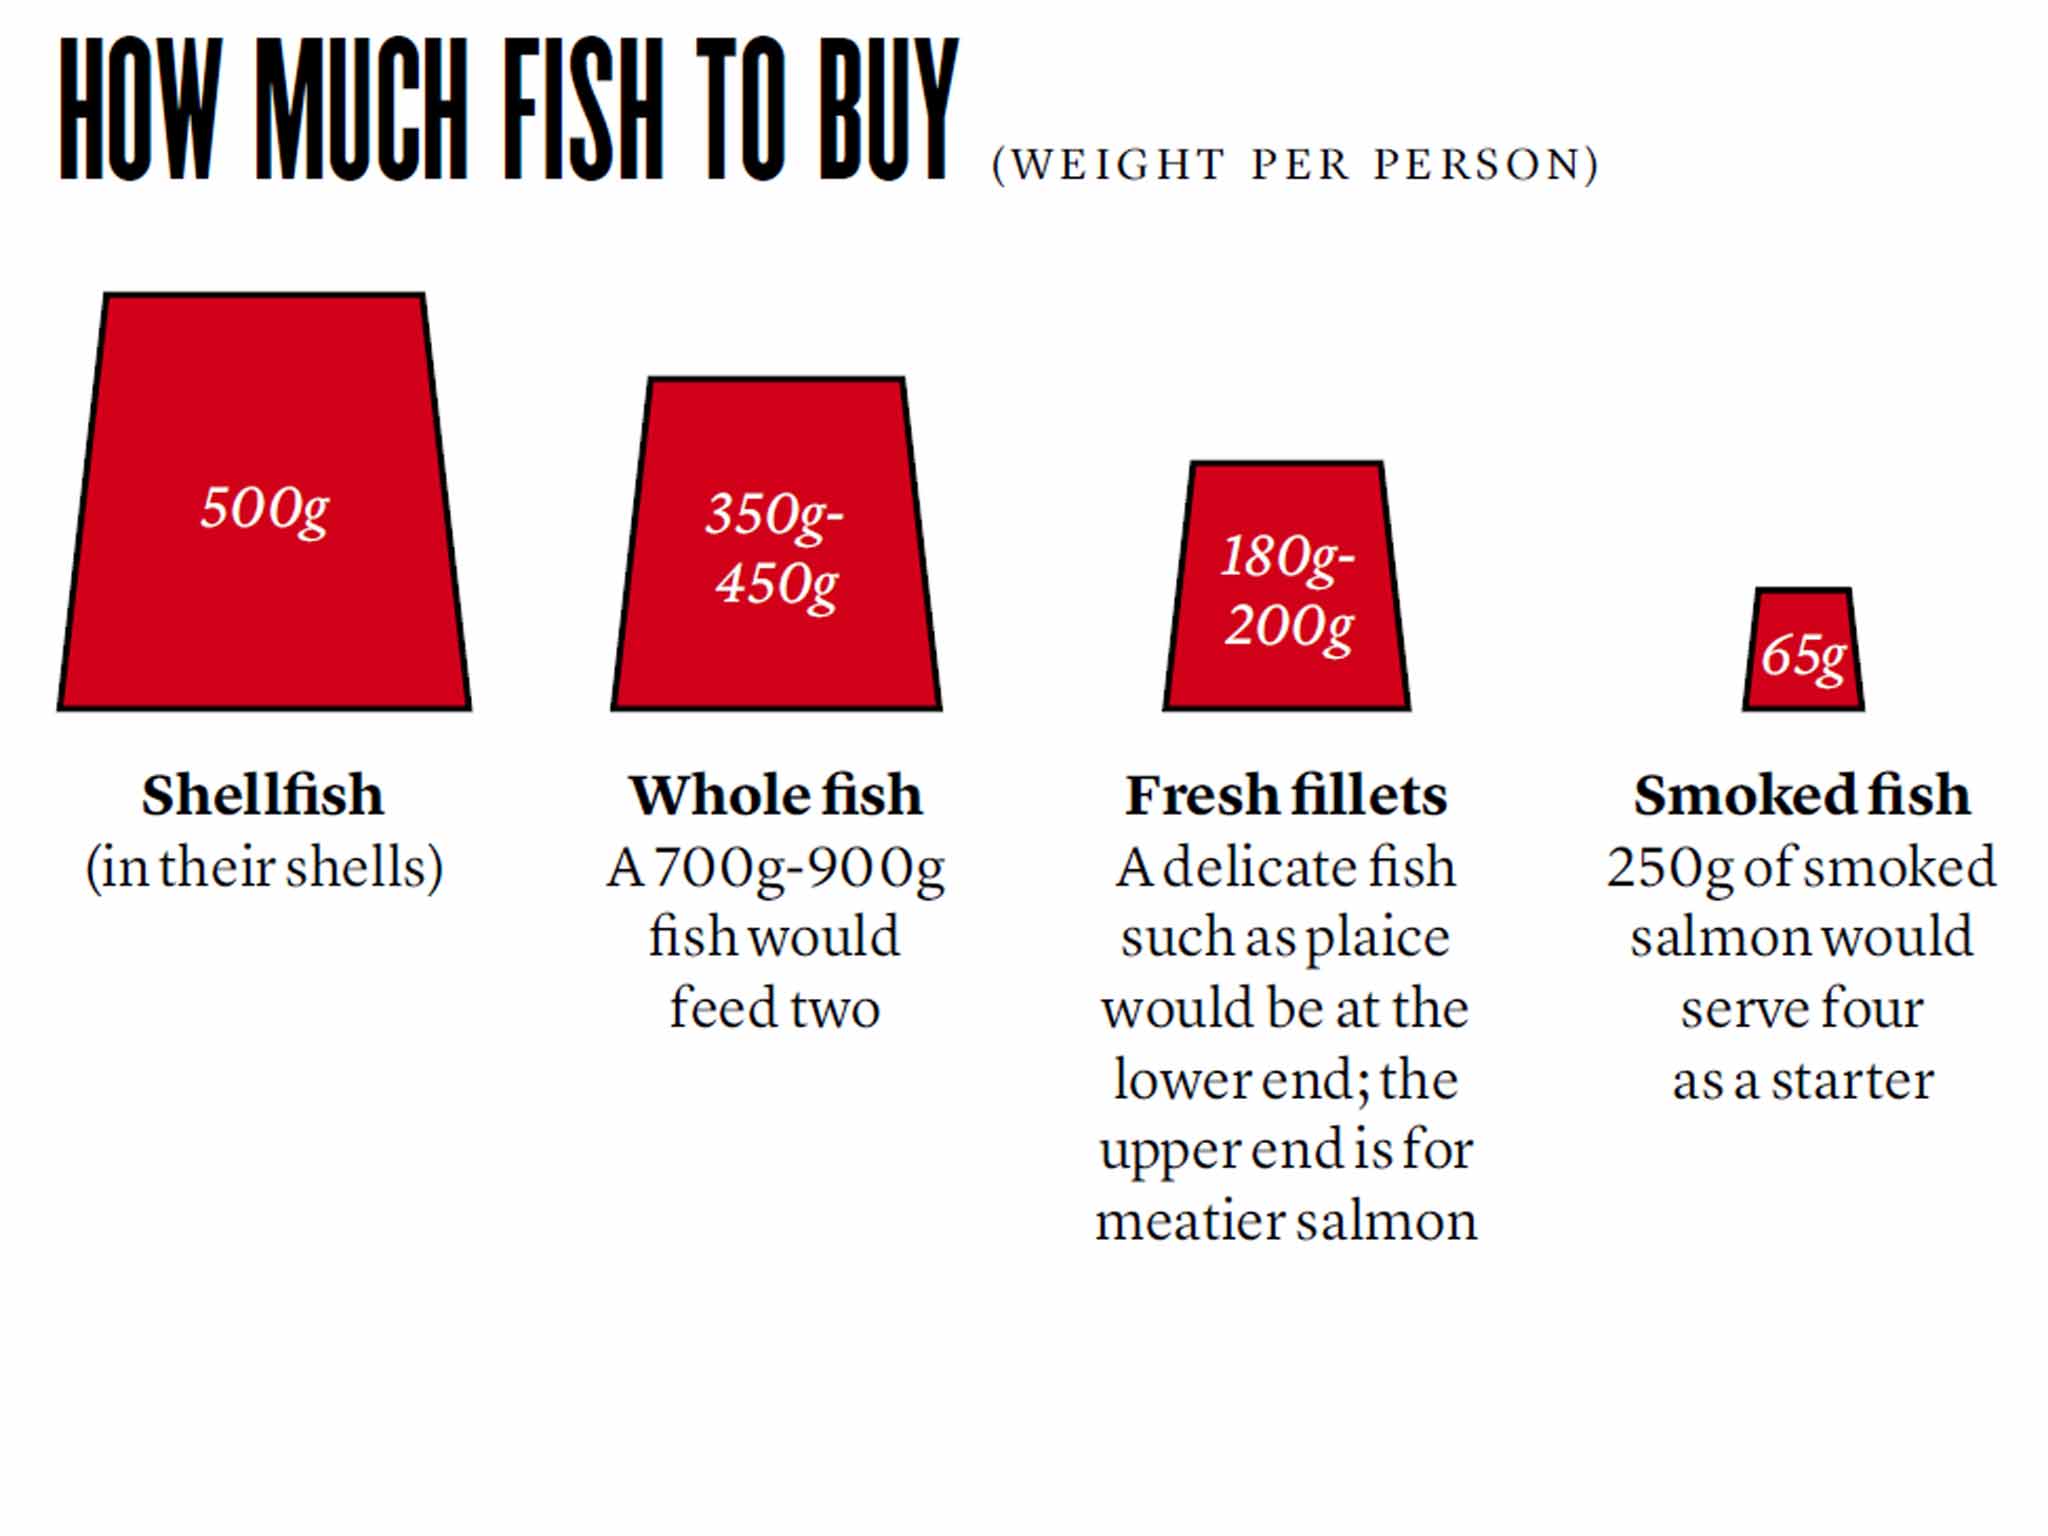 How much fish to buy per person